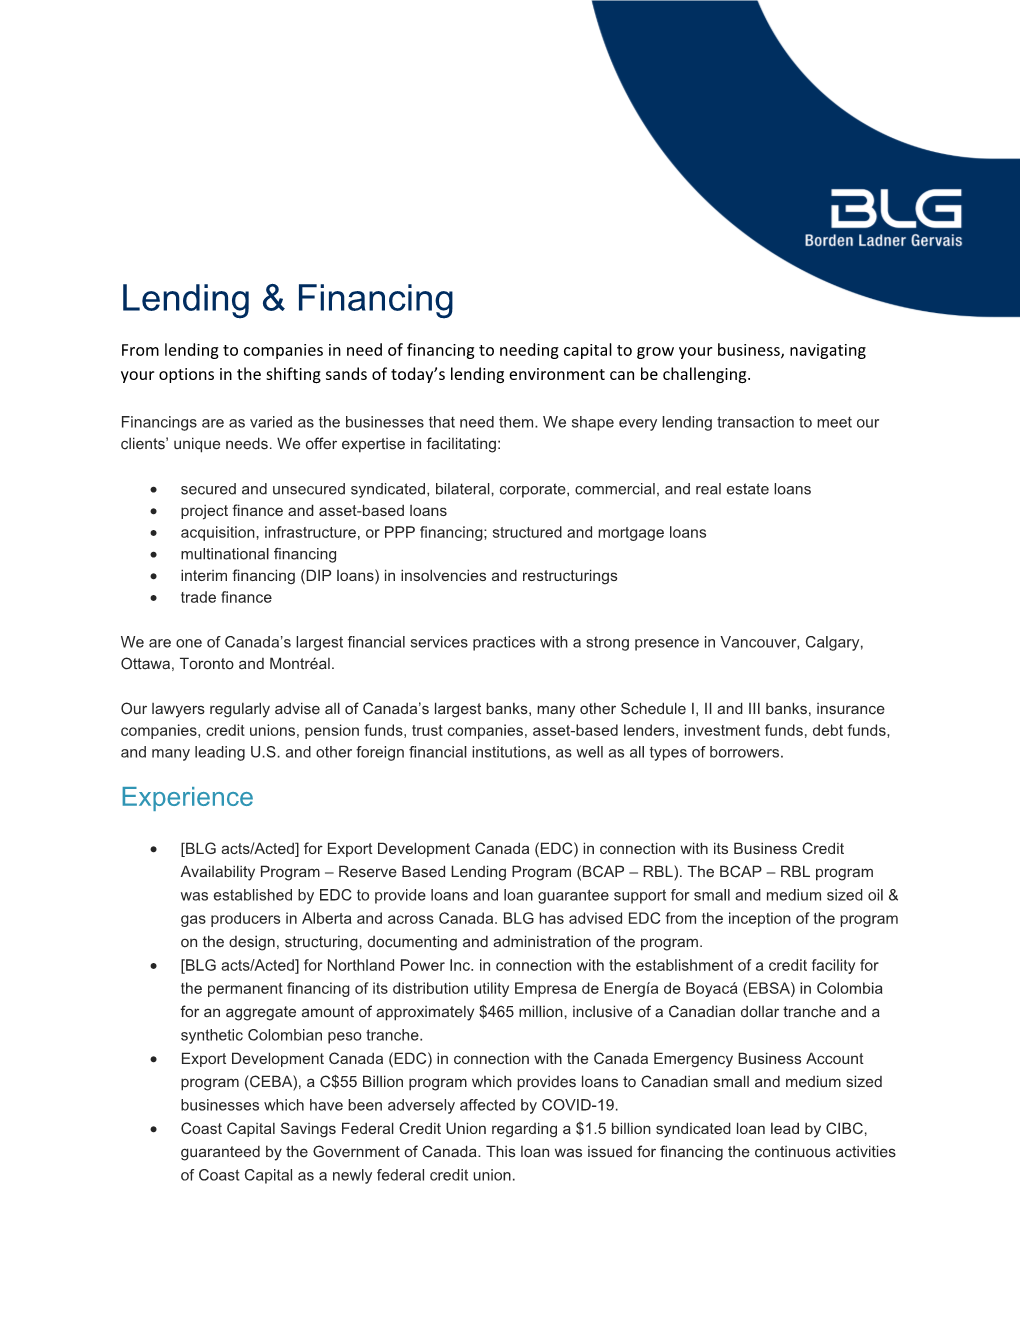 BLG Acts/Acted] for Export Development Canada (EDC) in Connection with Its Business Credit Availability Program – Reserve Based Lending Program (BCAP – RBL)